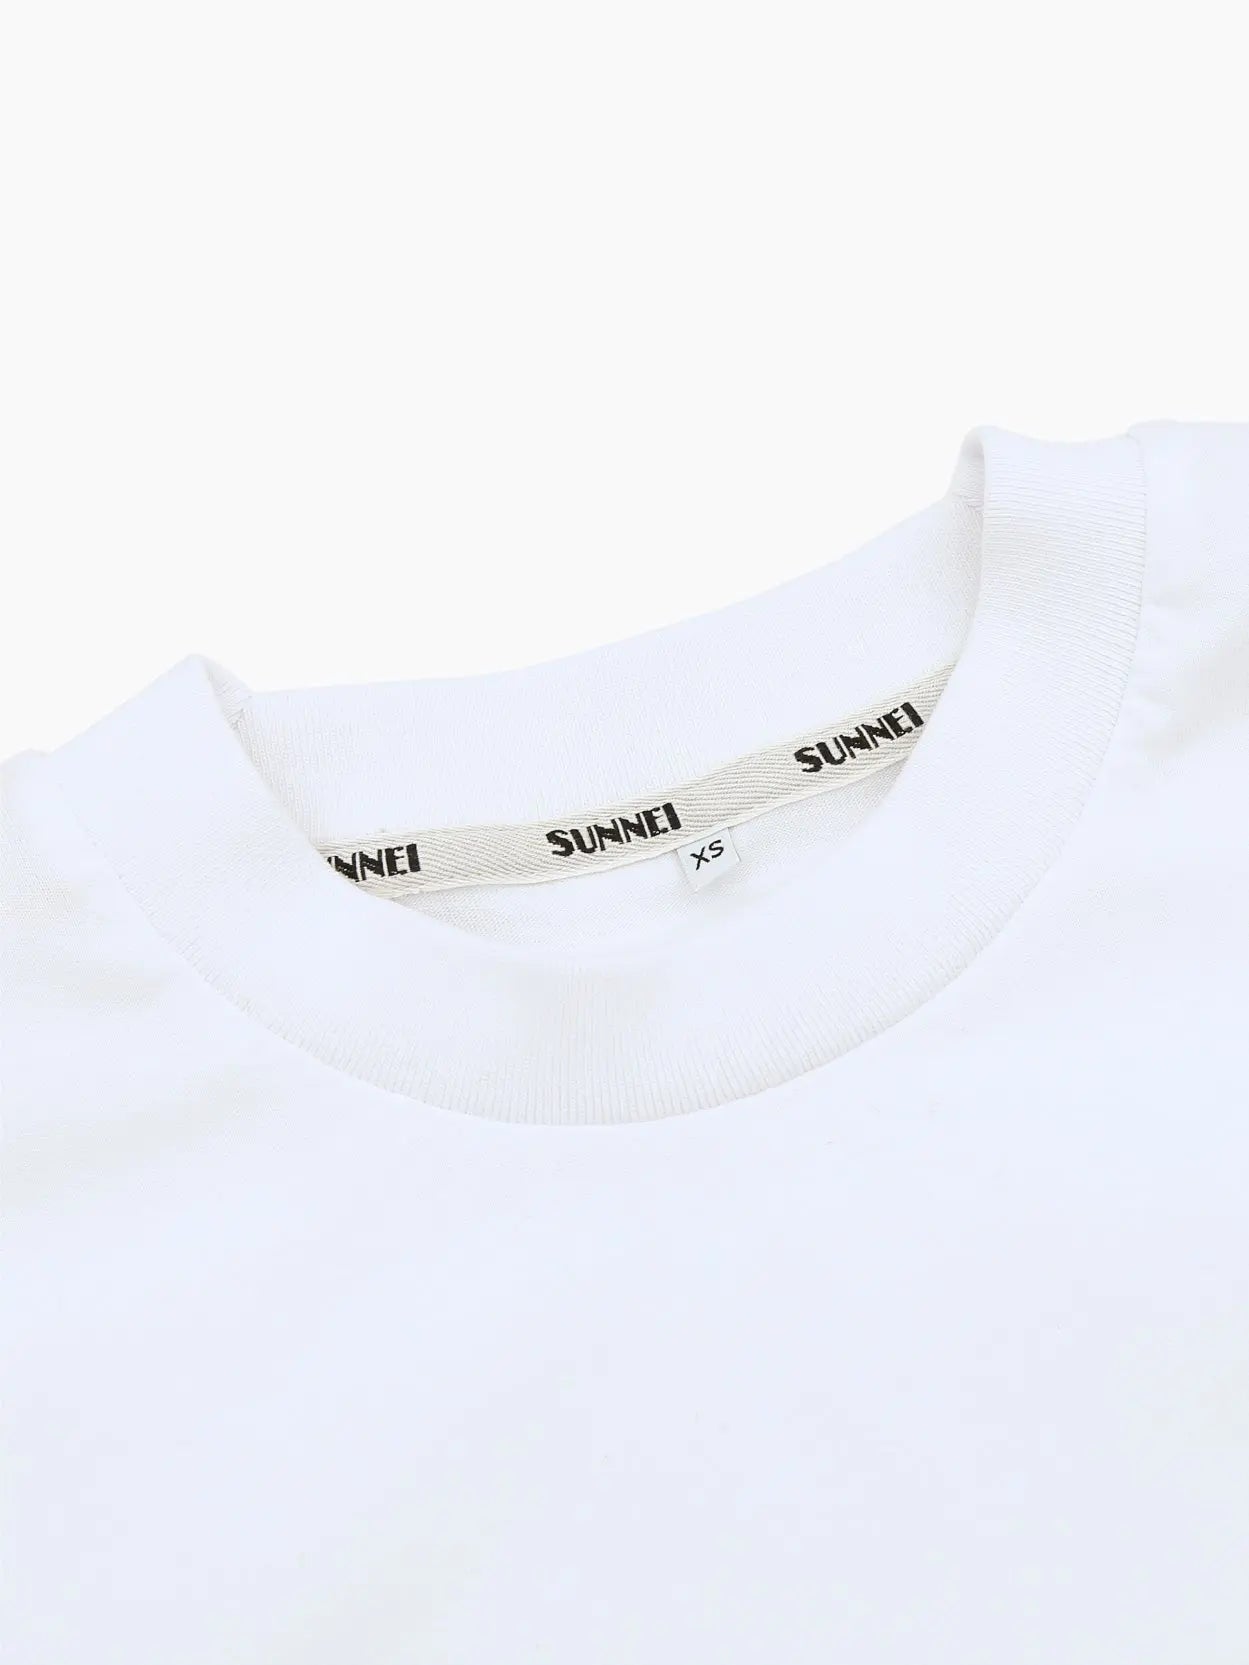 White t-shirt featuring a small image of a person in the center of the chest area and the text "TOMFOREVER" printed underneath. Available exclusively at Bassalstore in Barcelona. Product: Tom Forever T-Shirt Re-Edition by Sunnei.